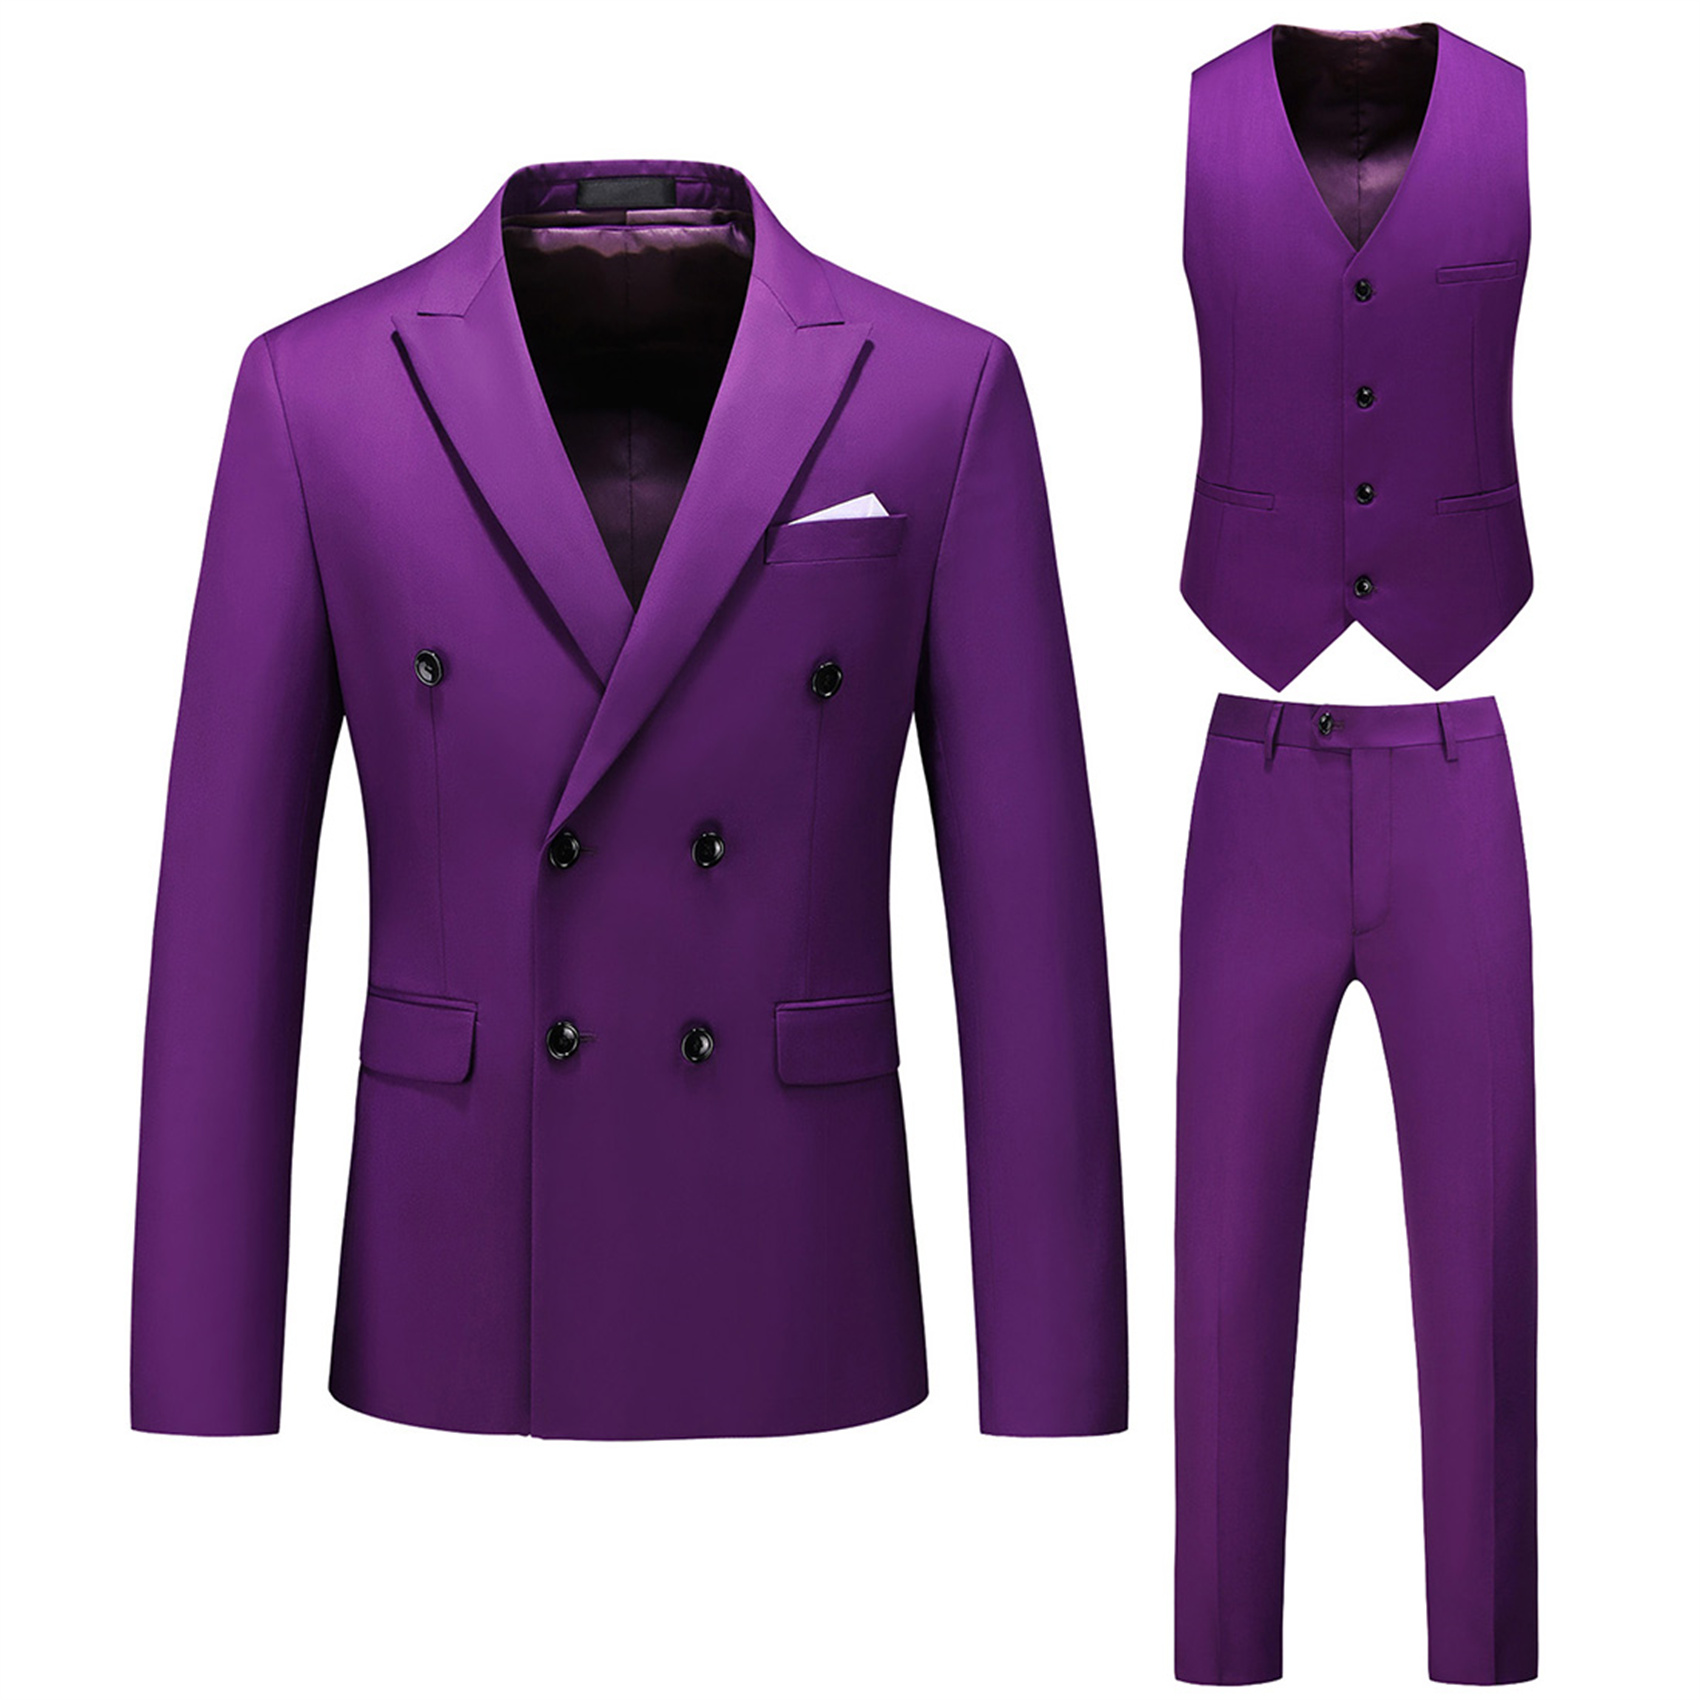 3 Piece Double Breasted Suit for Men, Slim Fit, Purple